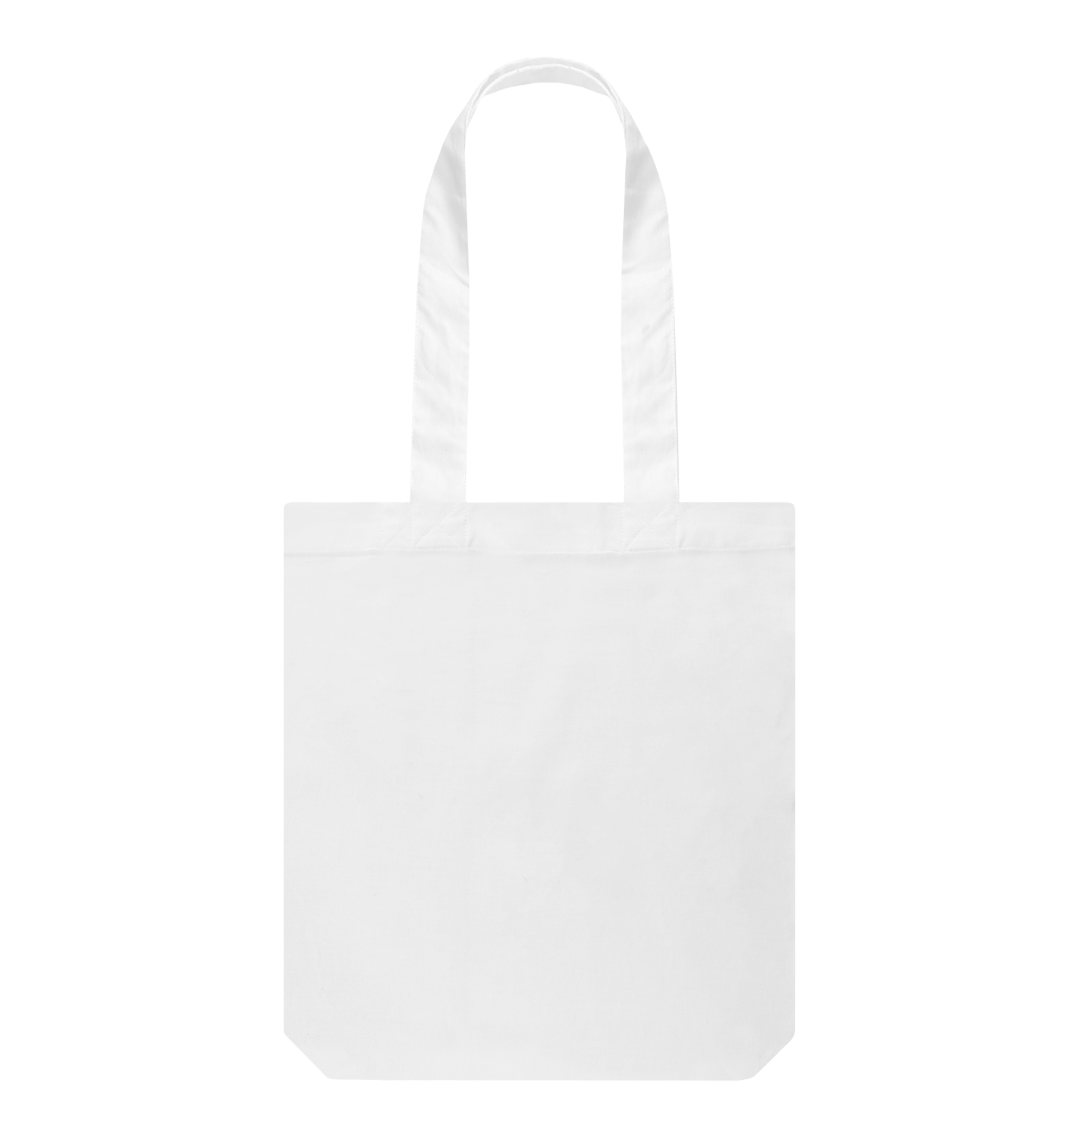 Blank Tote Canvas Bag with Zipper. 3 PC 19.7x15.7 inch Bags with Handles.  12 Oz Heavy Duty Reusable Washable Grocery Shopping Bags Plain Bags for  Teacher DIY Art Craft Paint Embroidery - Walmart.com